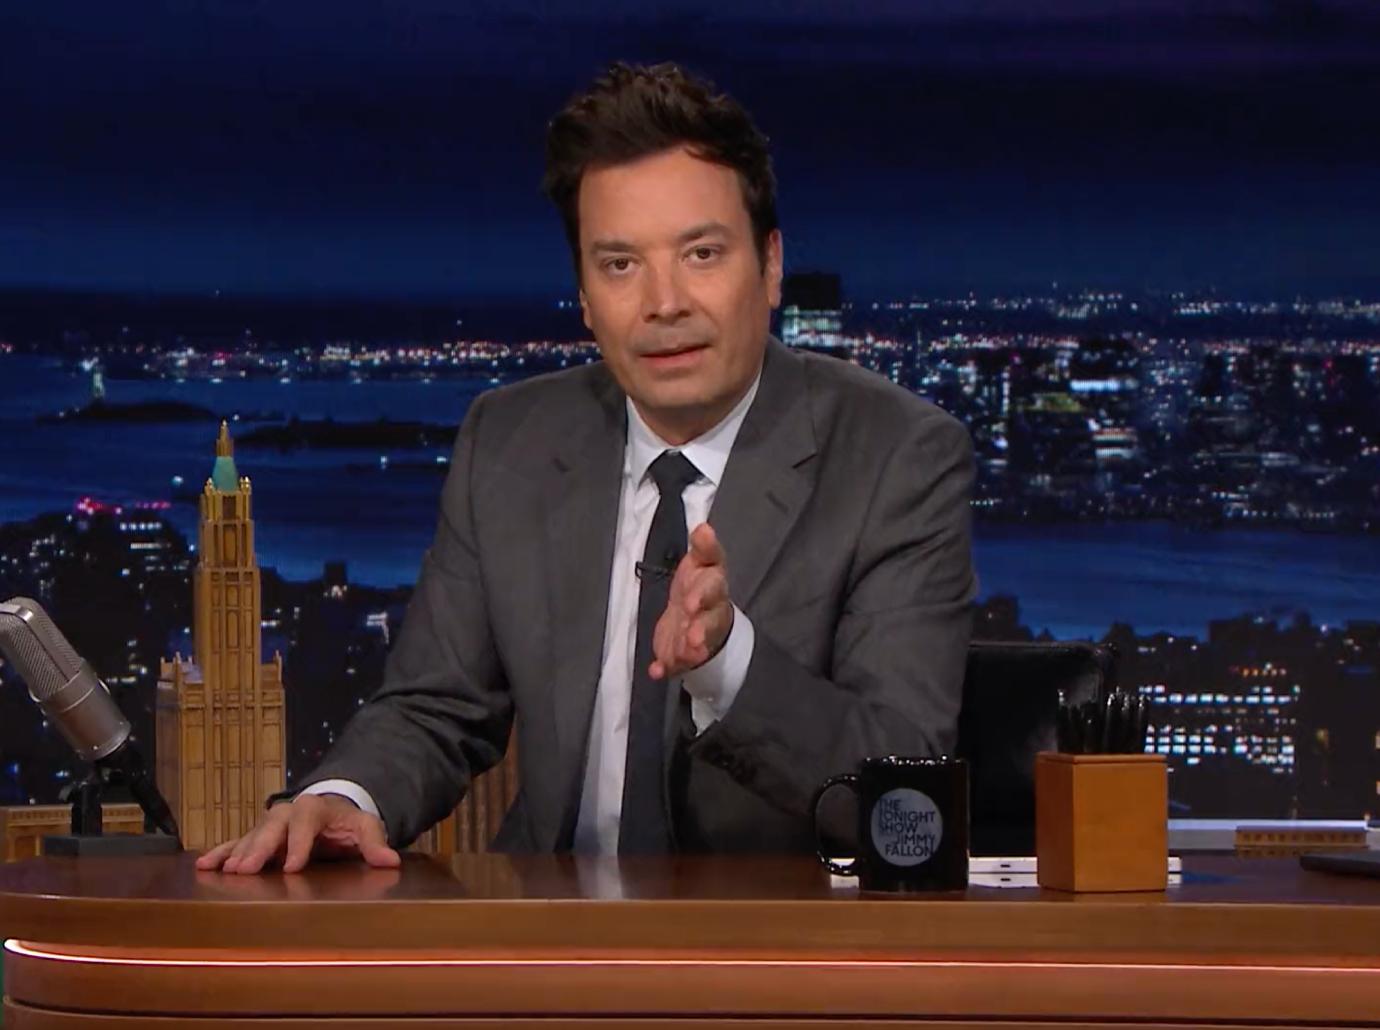 Jimmy Fallon Grateful For Tonight Show Return After Toxic Claims